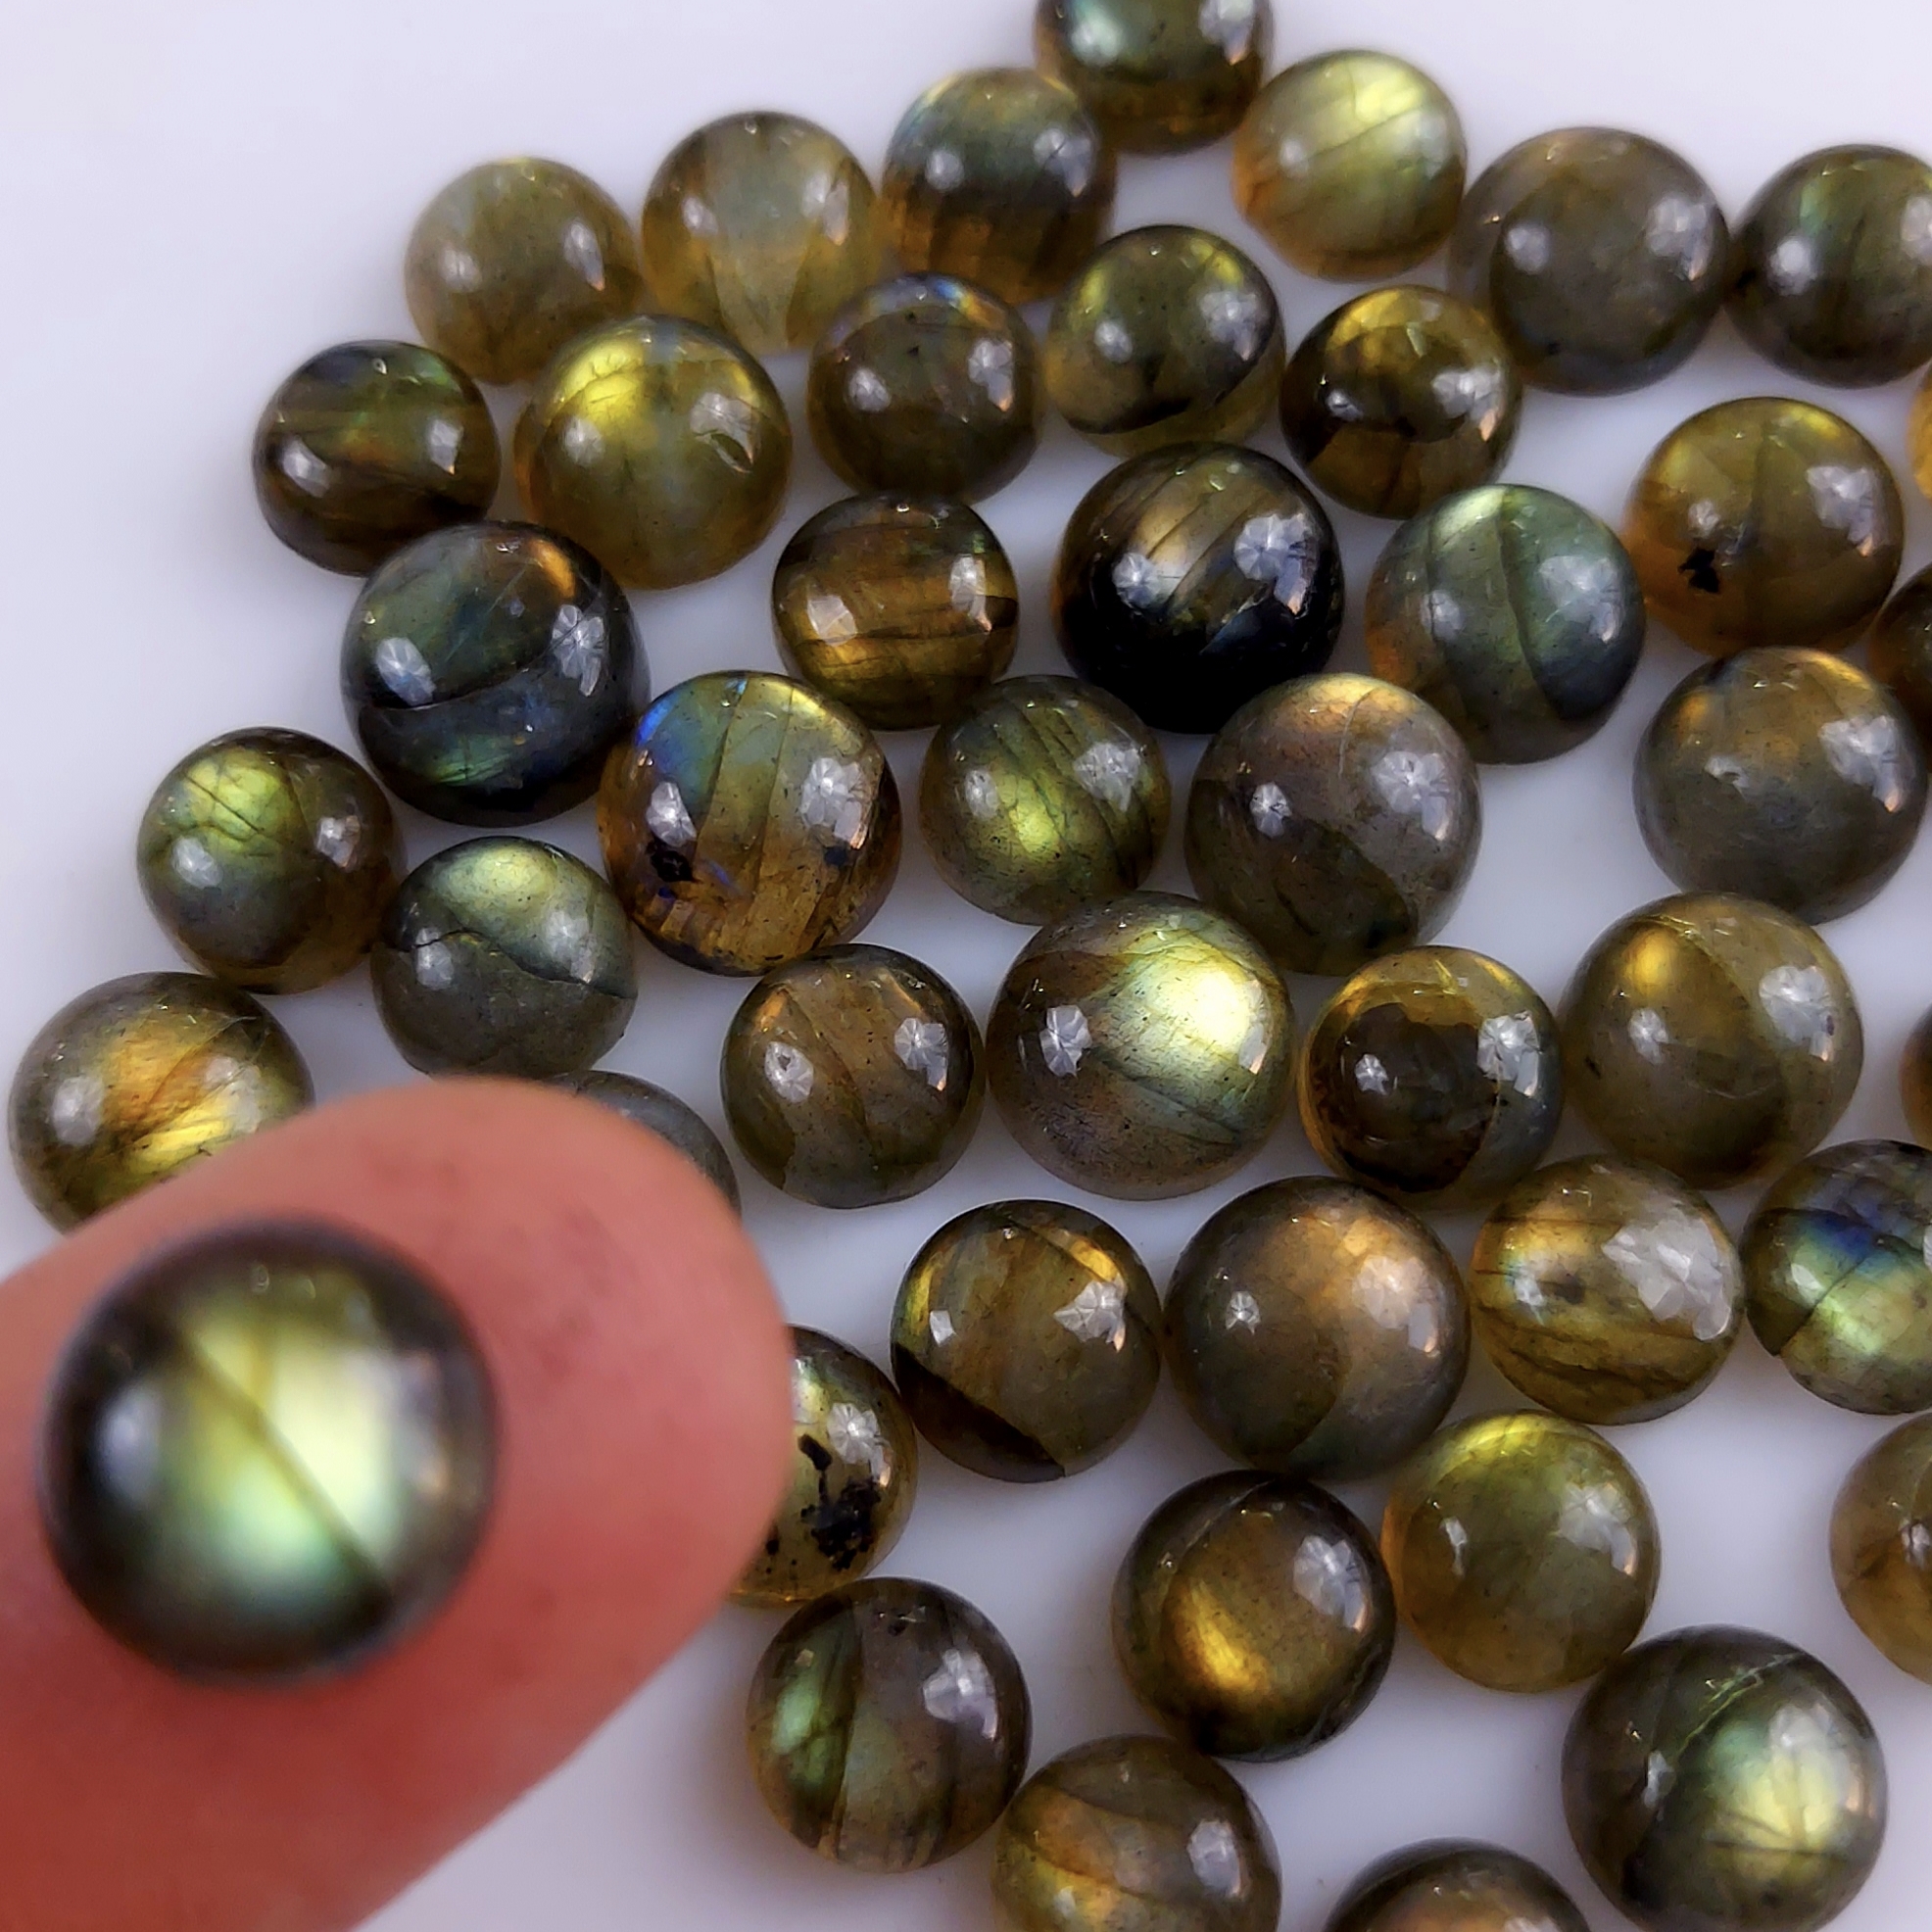 48 Pcs133Cts Natural Multifire Labradorite Loose Cabochon Round Gemstone Lot for Jewelry Making  7x7 5x5mm#1064